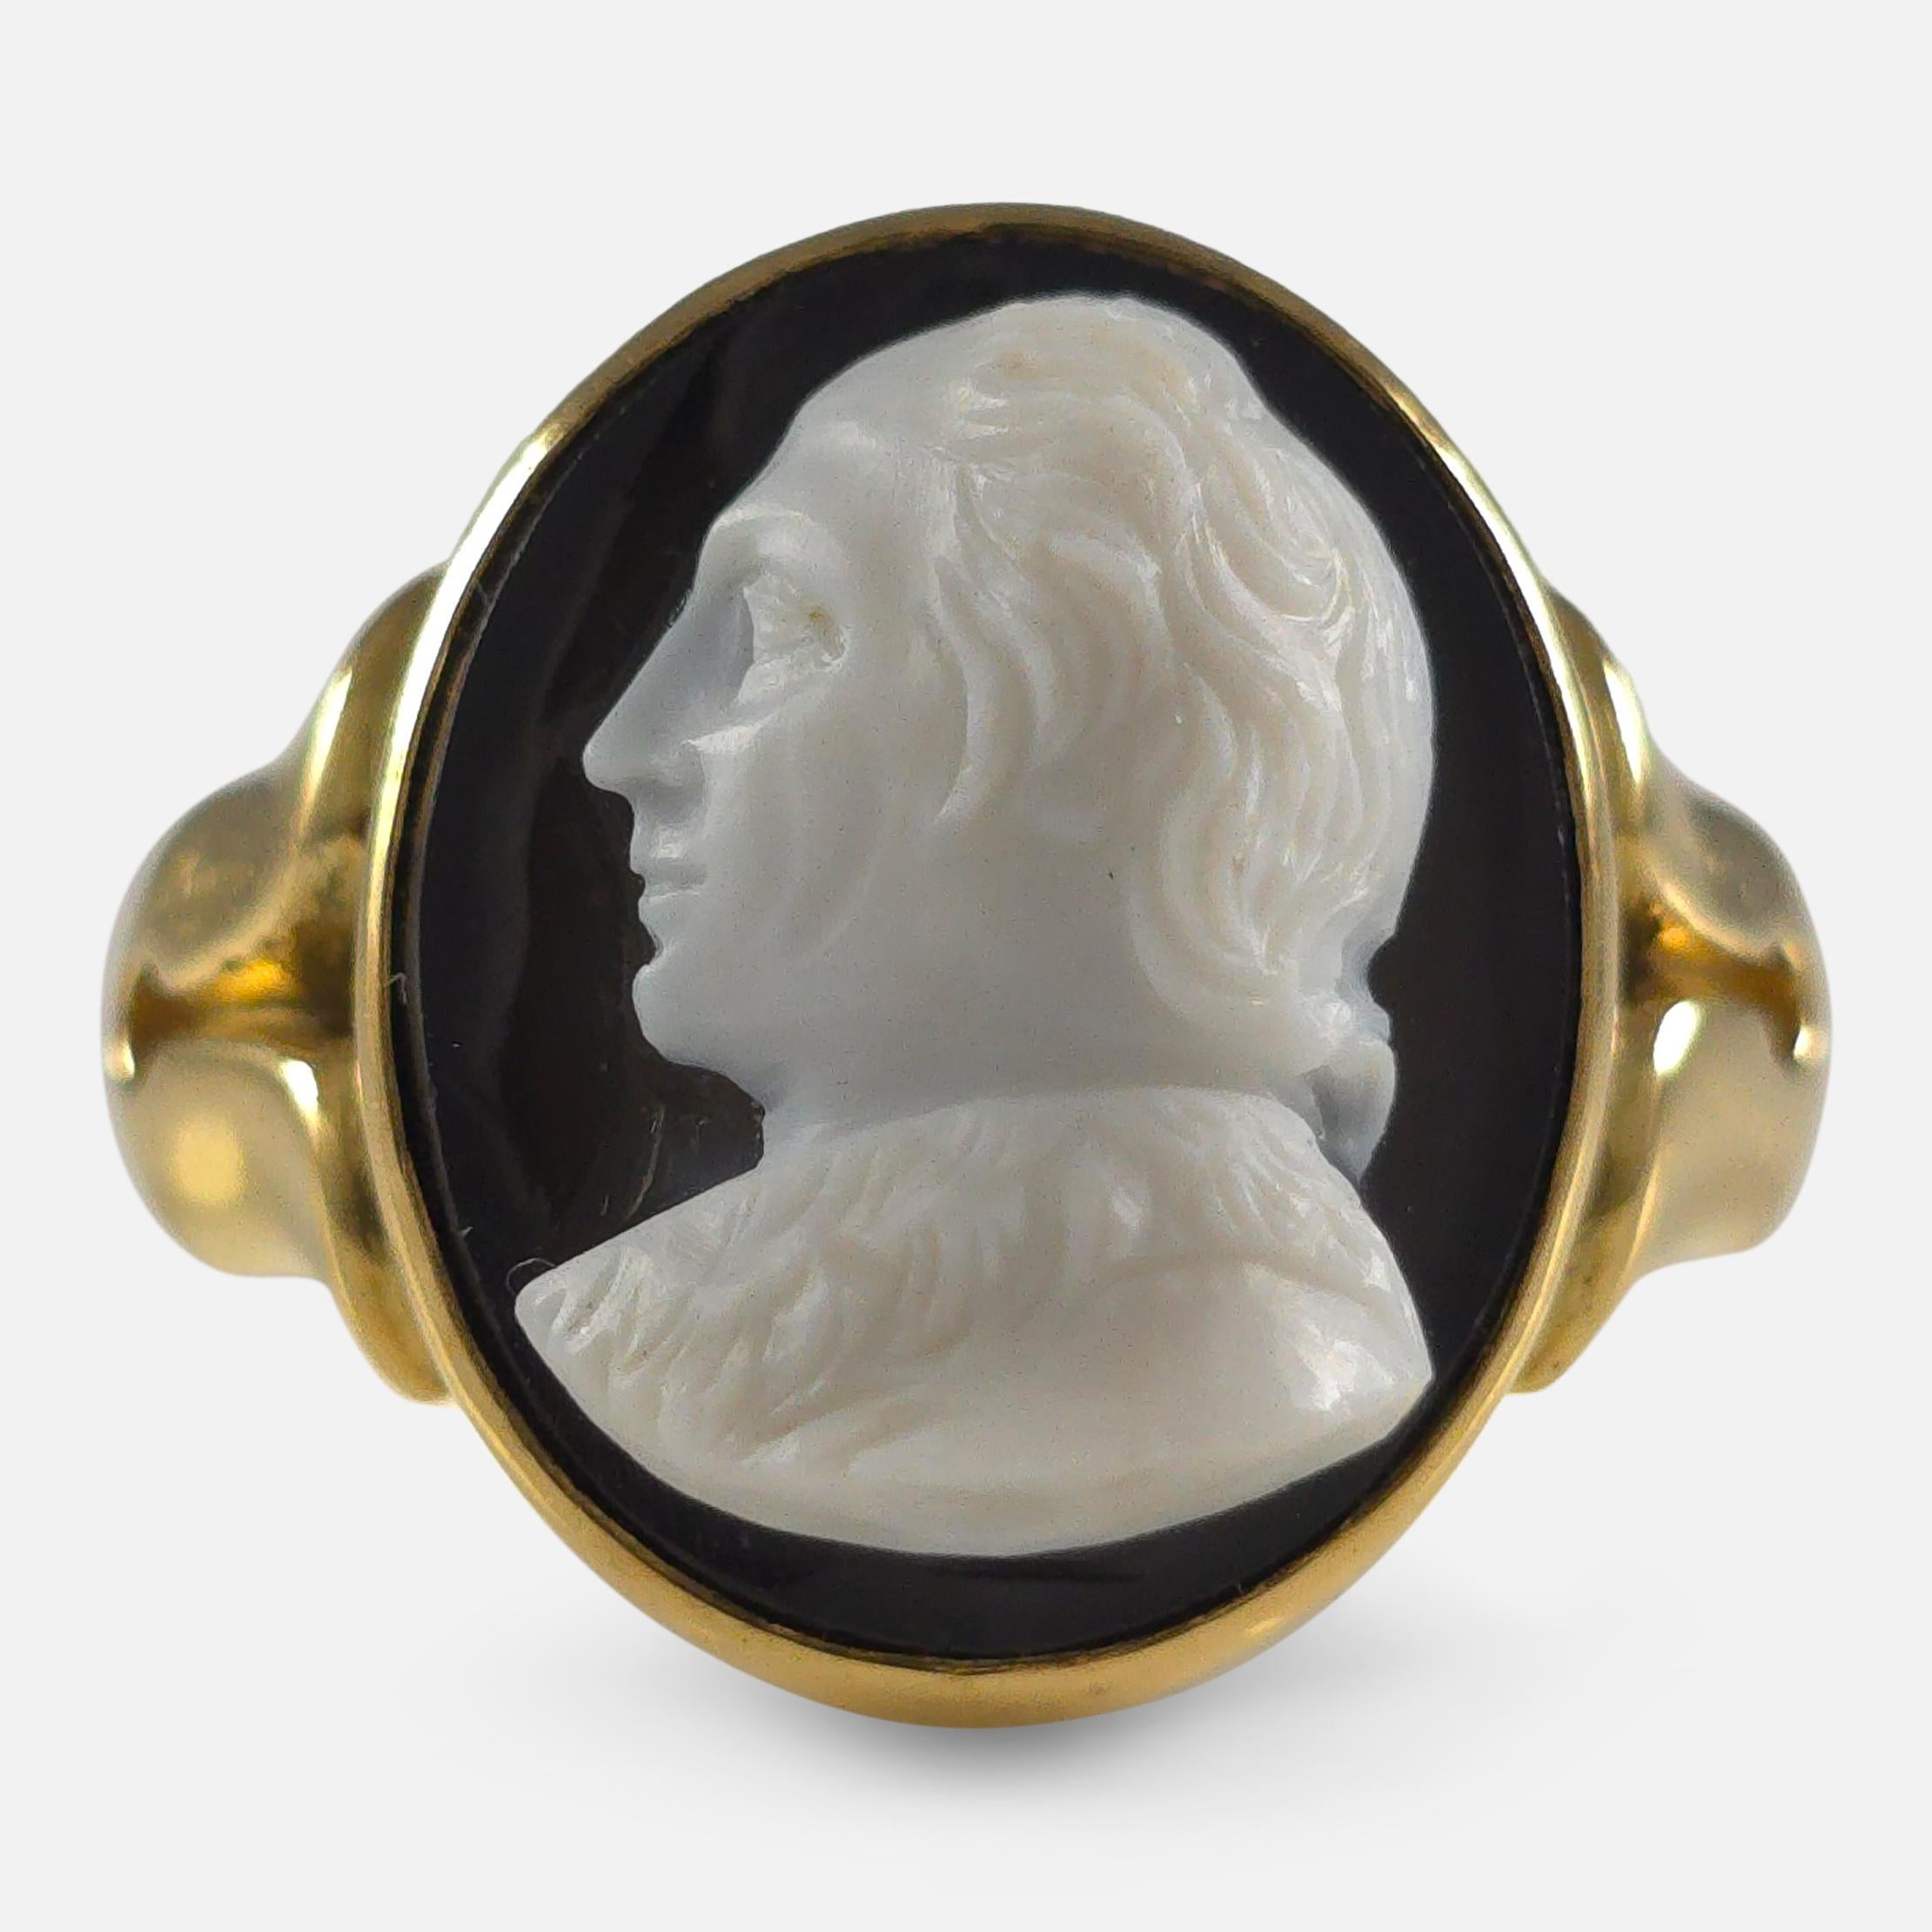 A Victorian oval onyx cameo ring set in 18ct yellow gold. The cameo, depicting the philosopher John Locke (1632-1704) is set in 18ct gold marked with Birmingham hallmarks, 1881.

• Period: Late 19th century.
• Measurement: UK ring size N 1/2